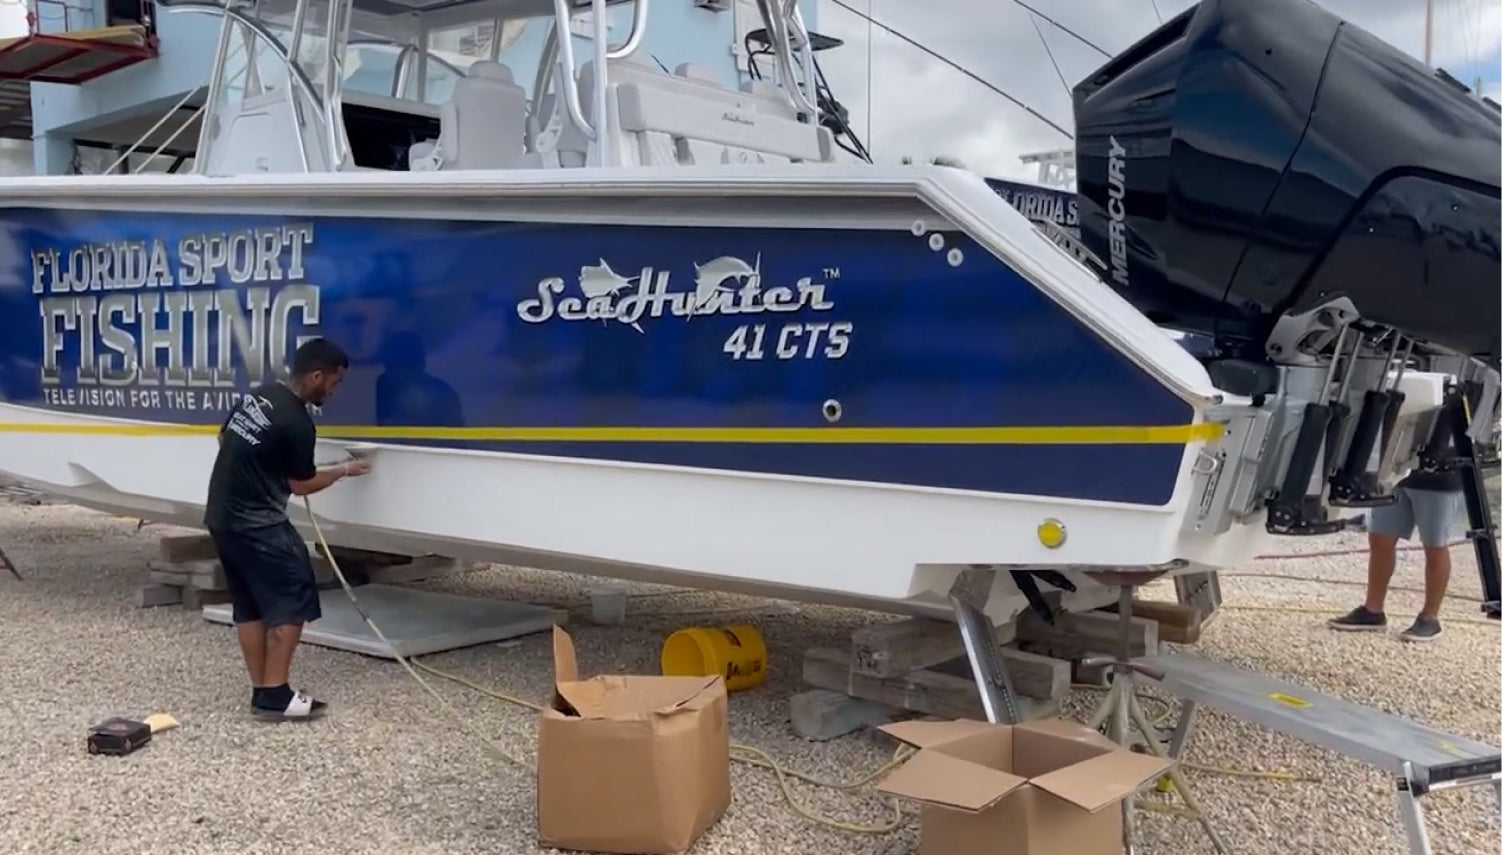 PROVEN PERFORMANCE & CLEAR PROTECTION: SEAHUNTER 41 CTS